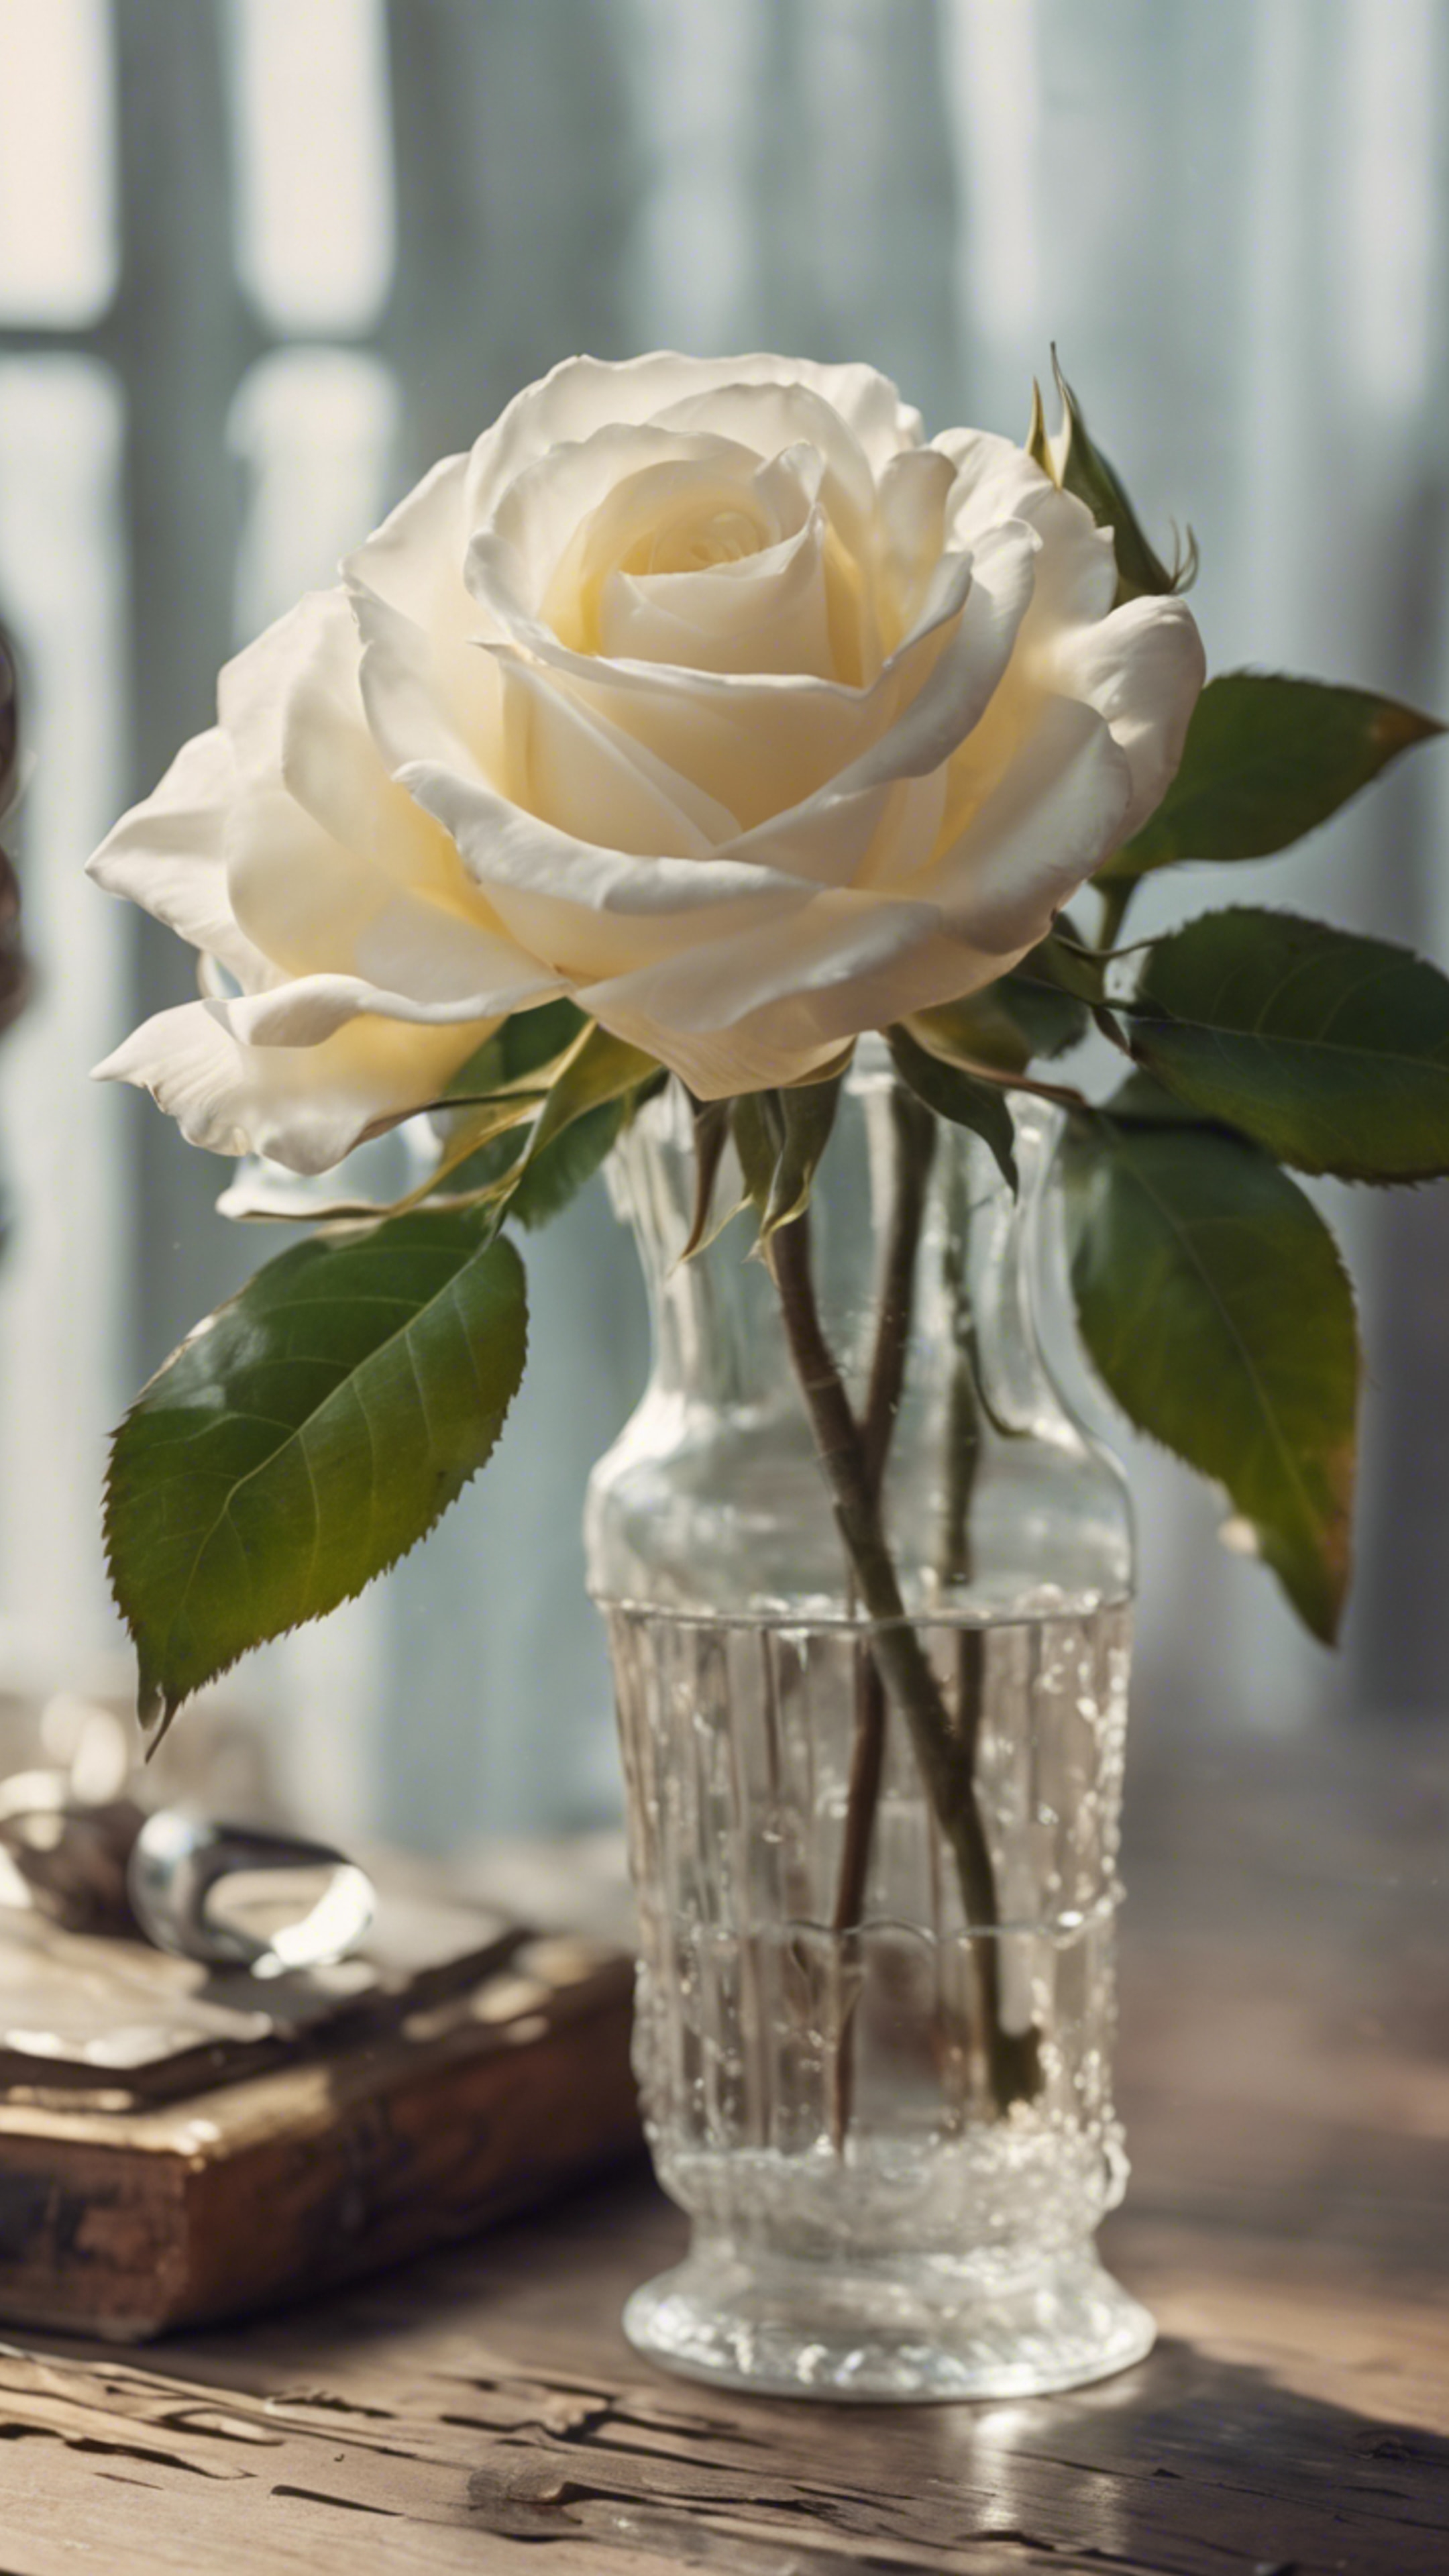 A soft white rose in a vintage glass vase on an antique wooden table. Tapéta[fc4486b9e2ee4669bbfe]